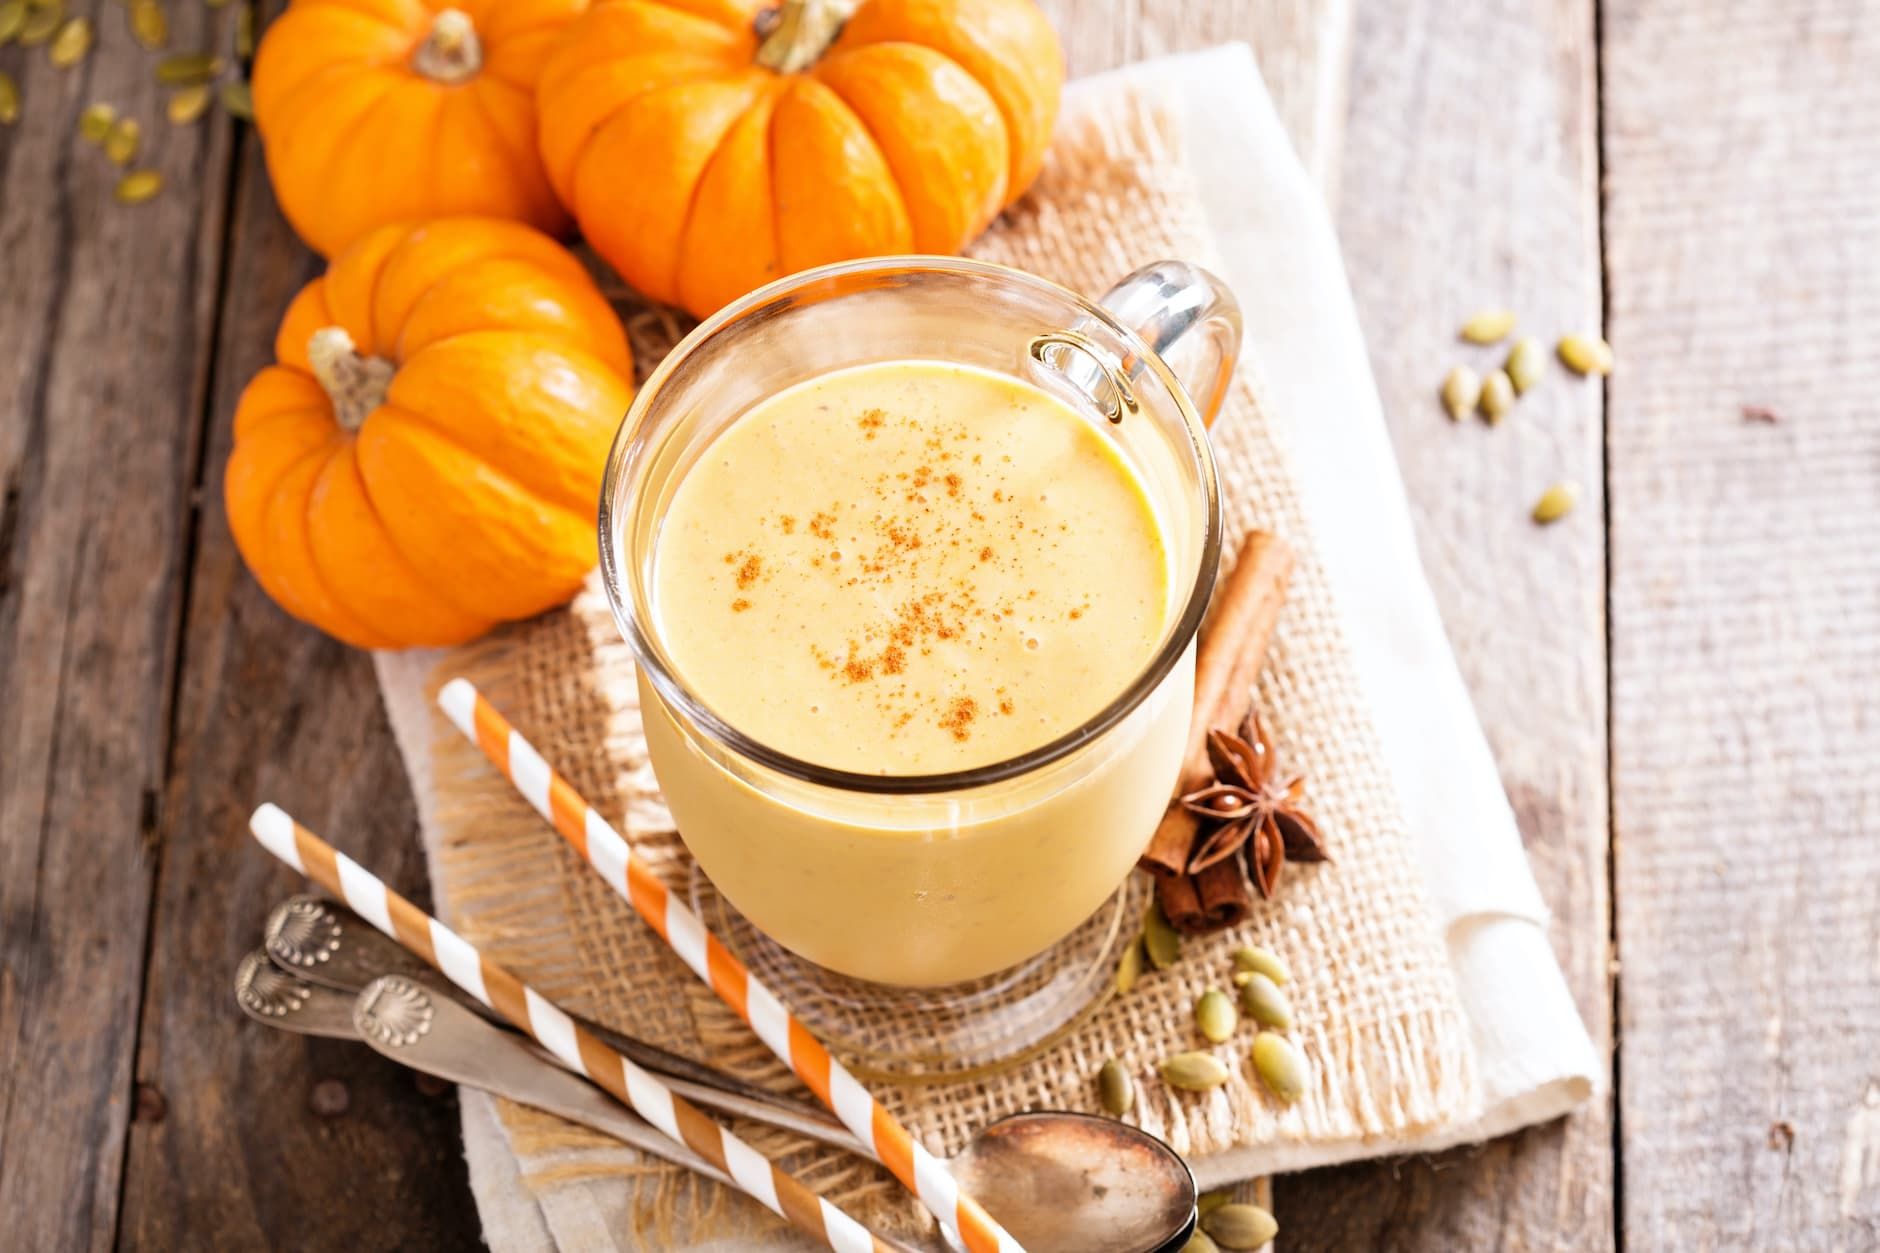 Pumpkin One Of The Most Amazing Health Benefits